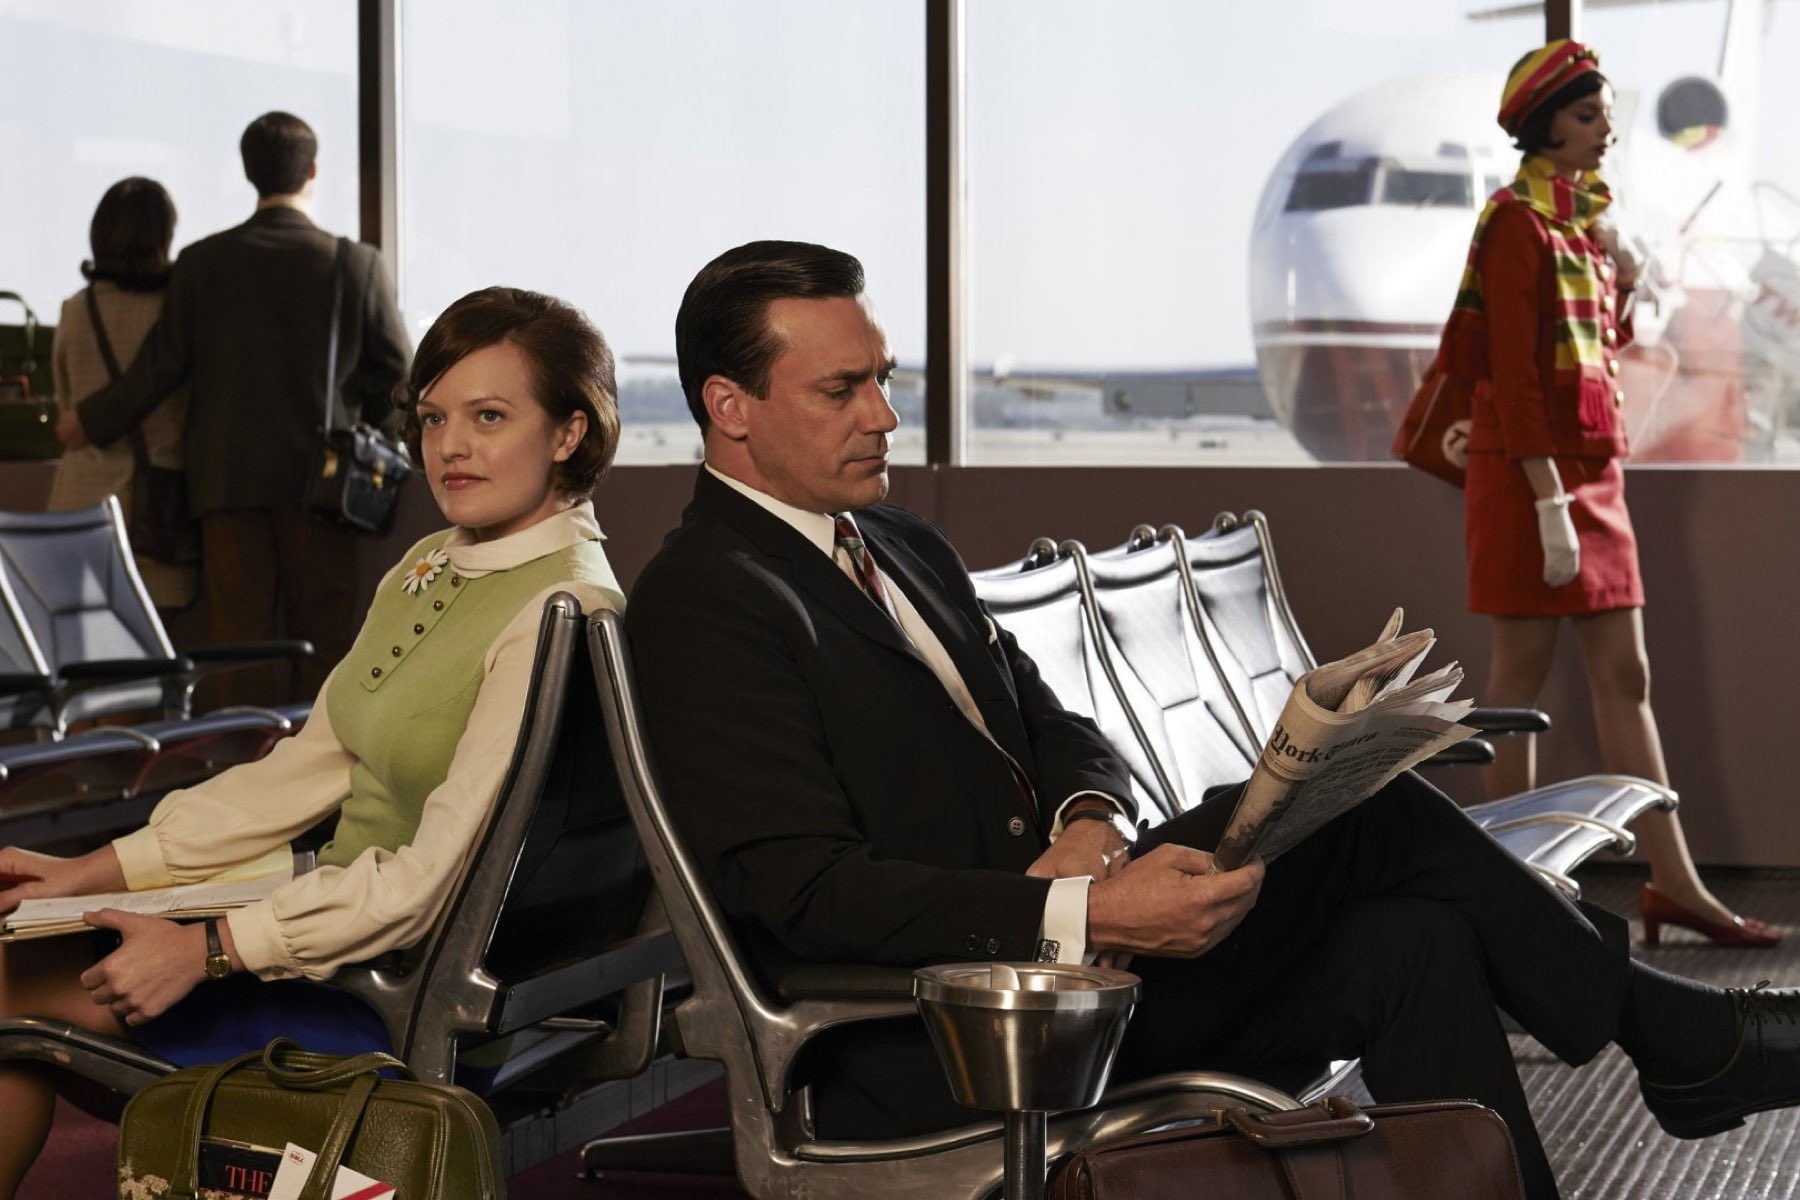 Mad Men: Peggy and Don in an airport